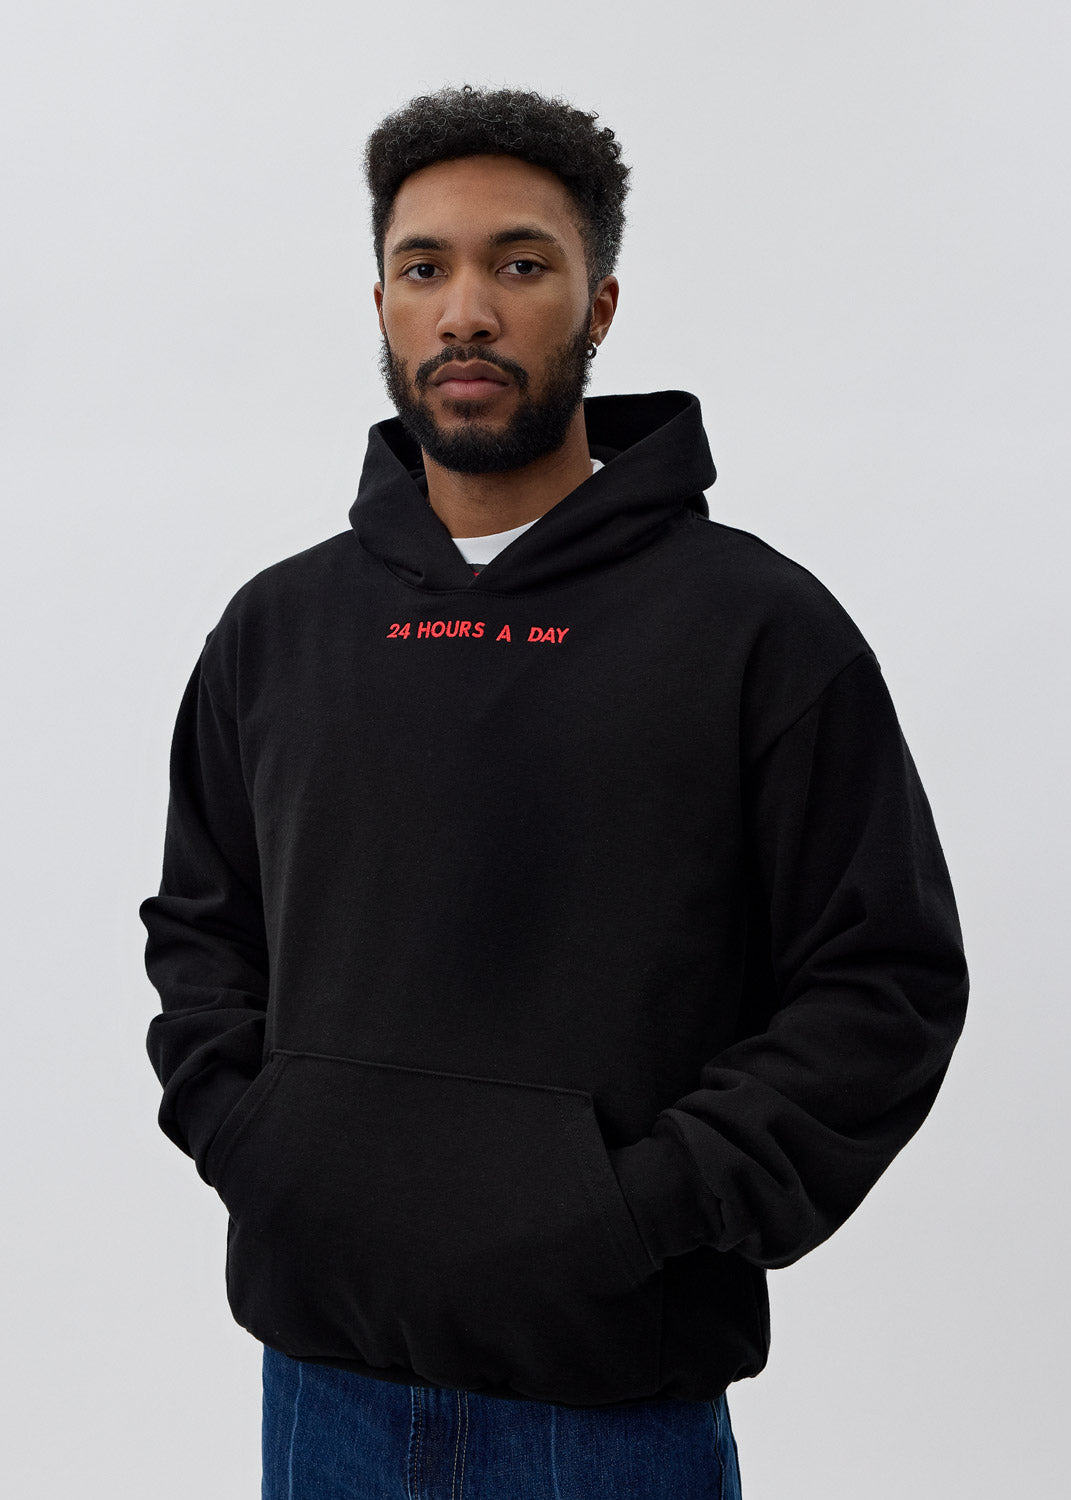 House of Miracles - Black Peace with God Hoodie | 1032 SPACE